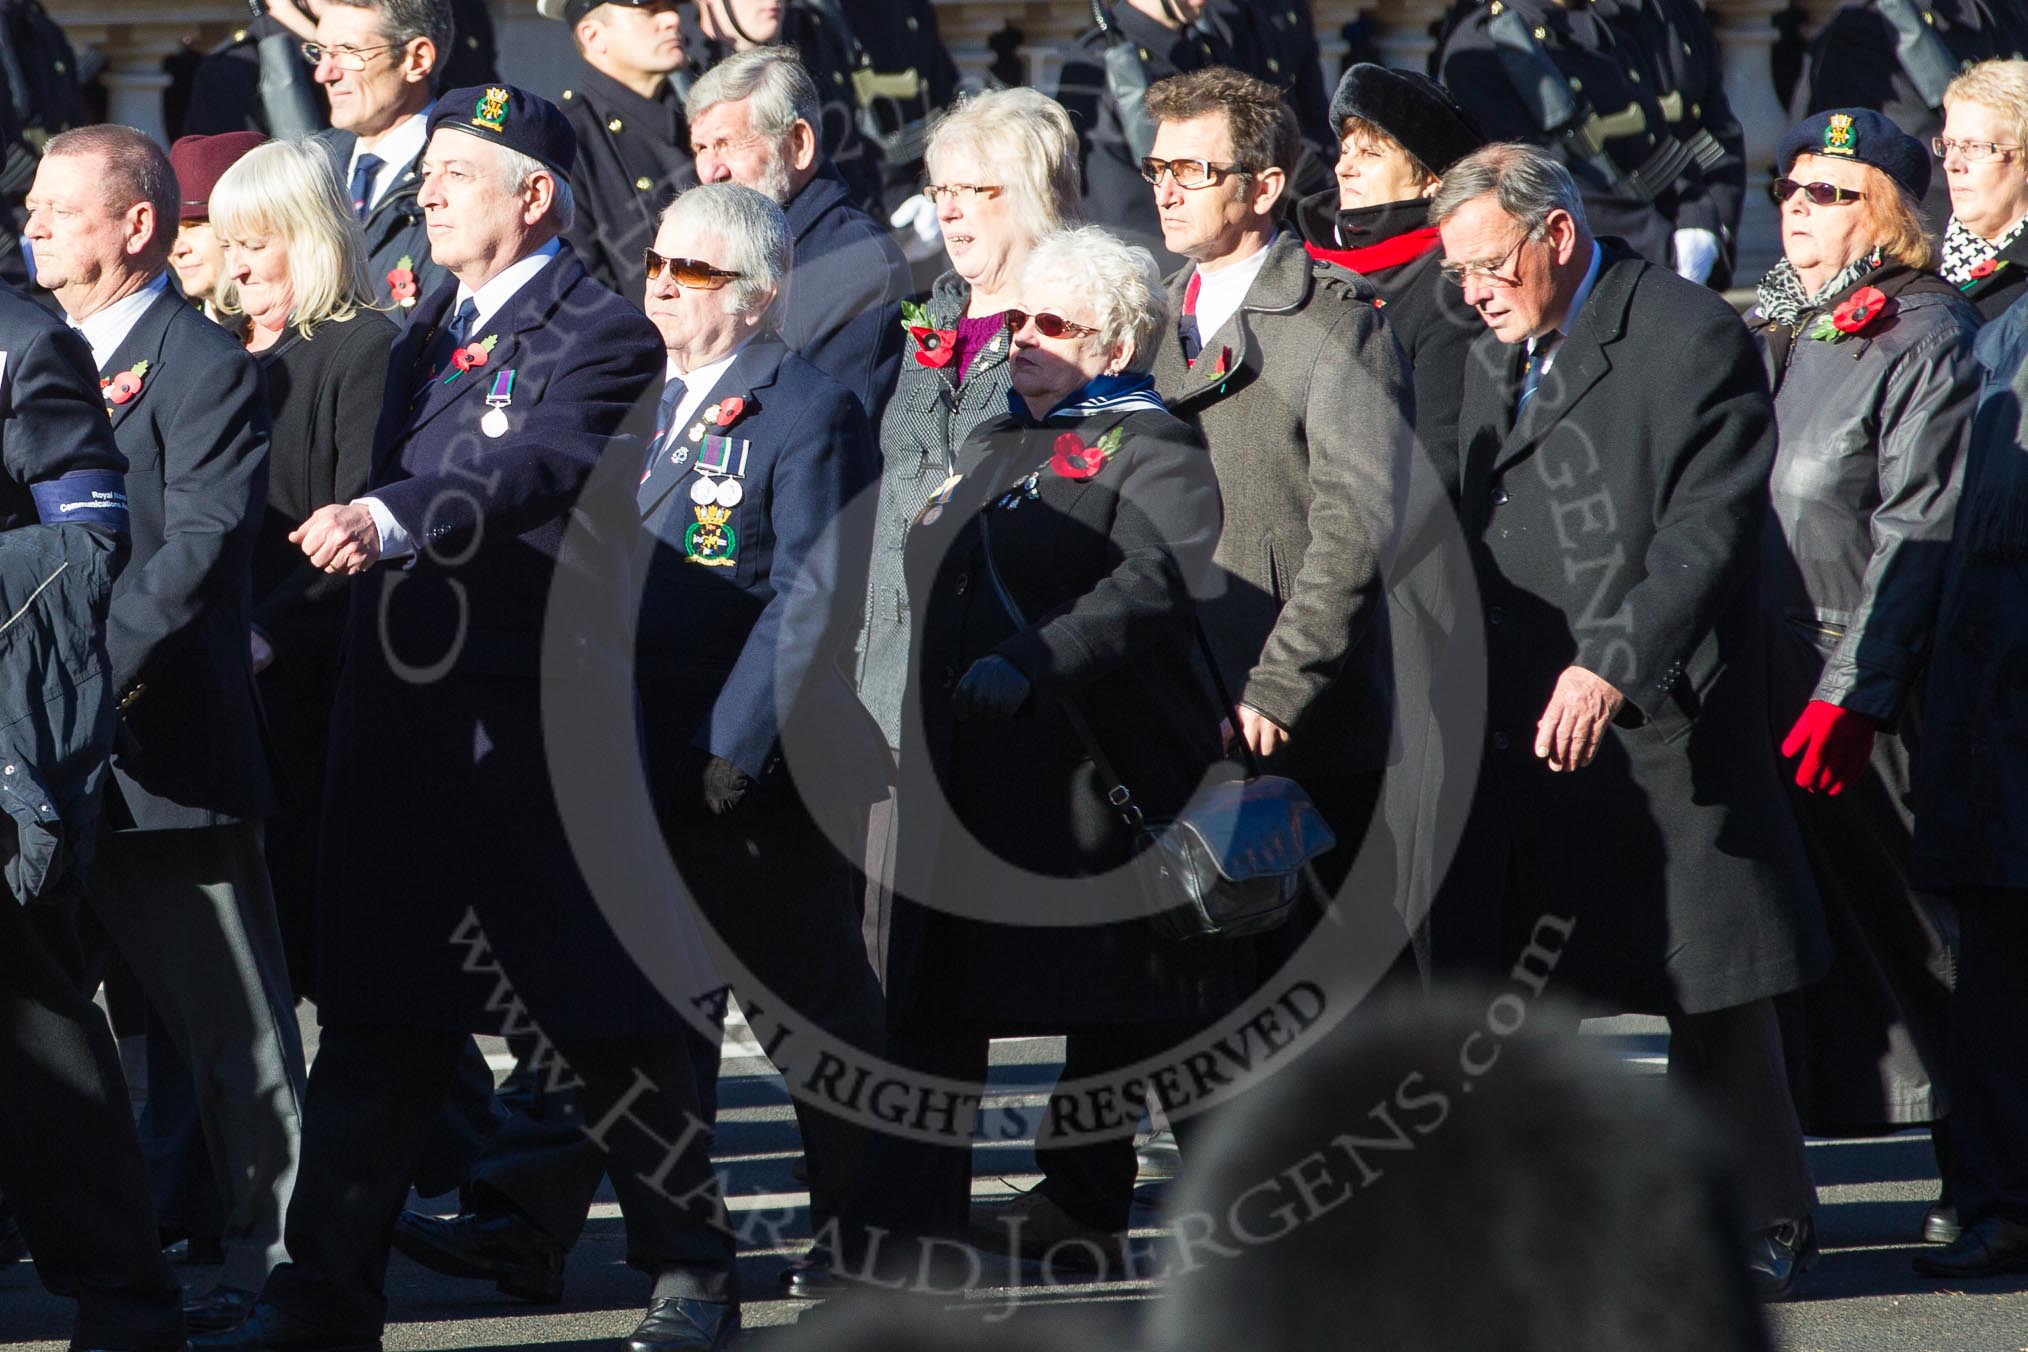 Remembrance Sunday 2012 Cenotaph March Past: Group E31 - Royal Naval Communications Association..
Whitehall, Cenotaph,
London SW1,

United Kingdom,
on 11 November 2012 at 11:41, image #226